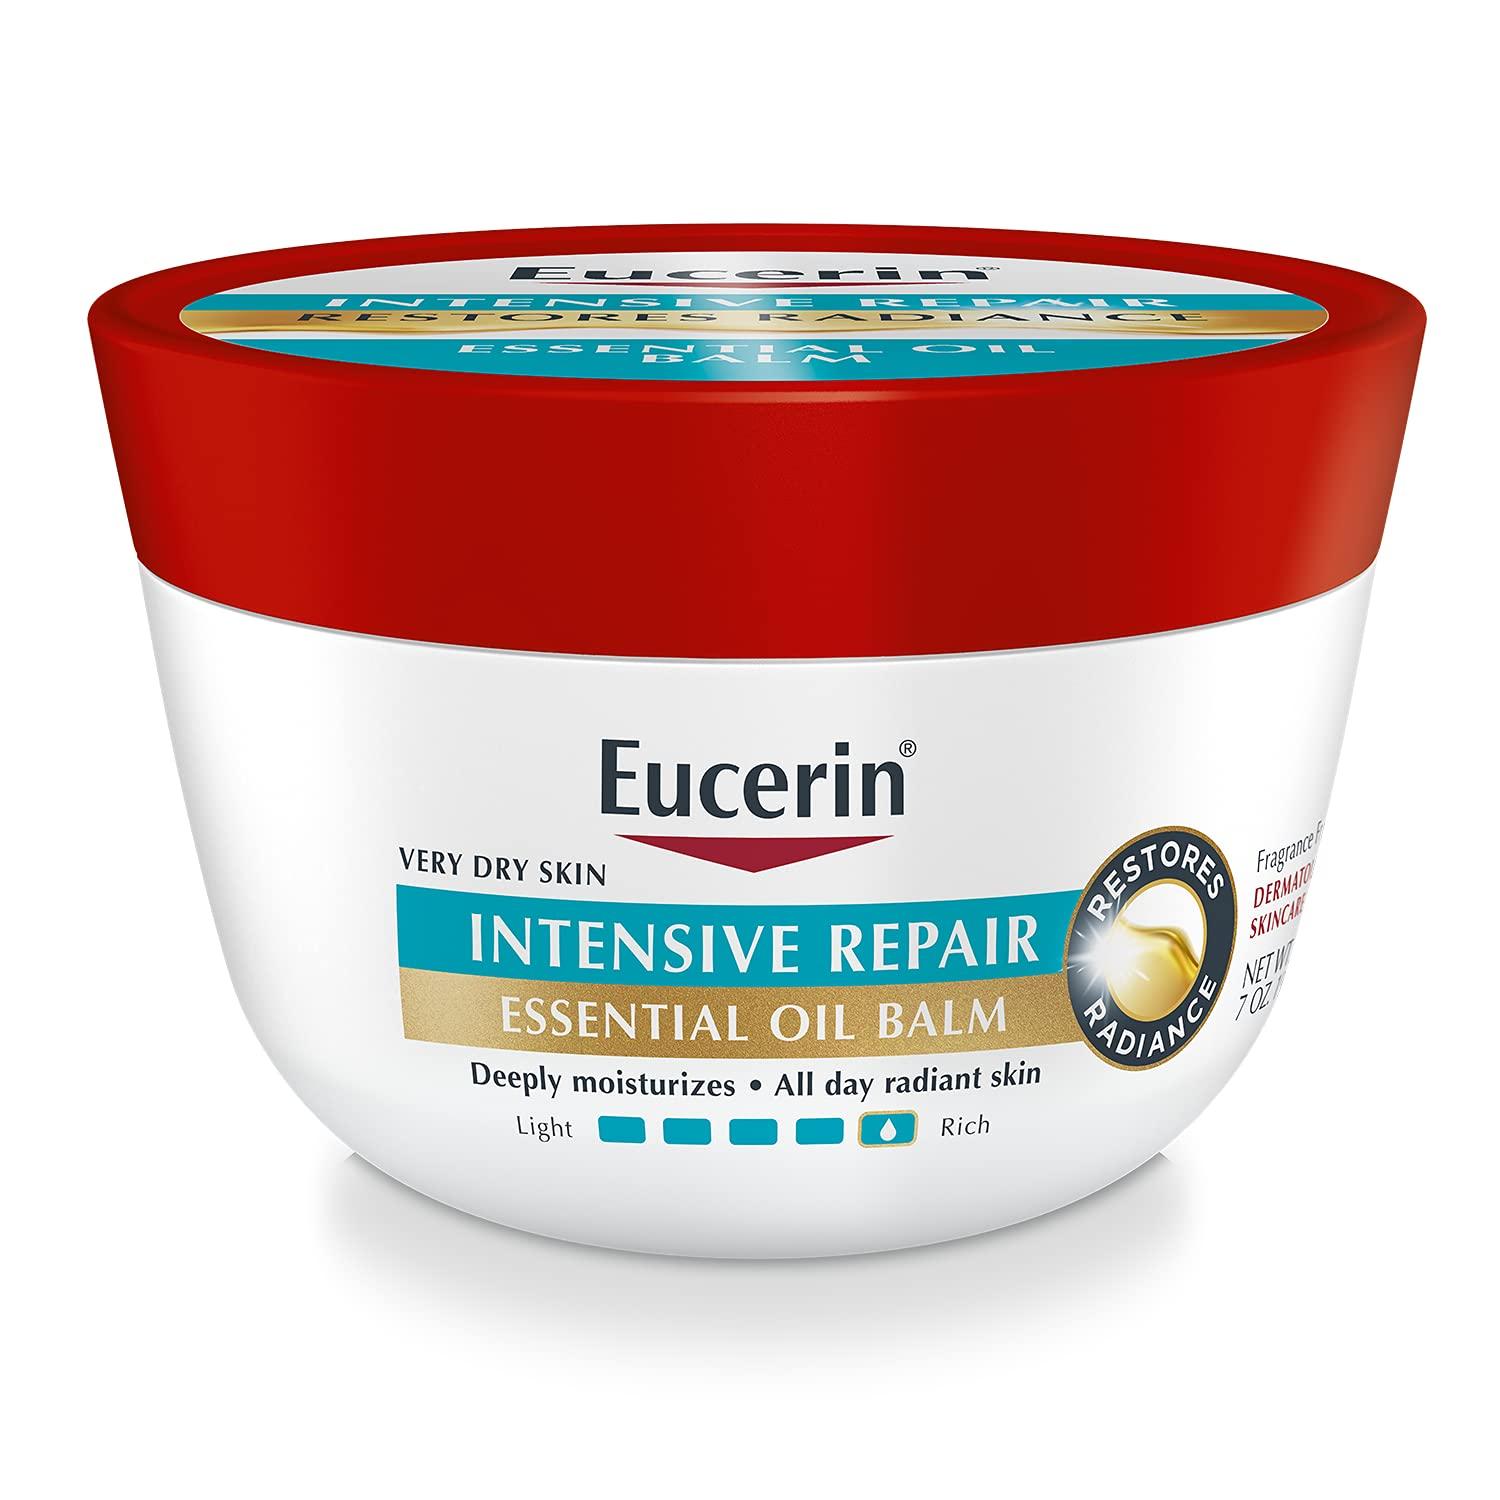 Eucerin Intensive Repair Essential Oil Balm for $7.86 Shipped